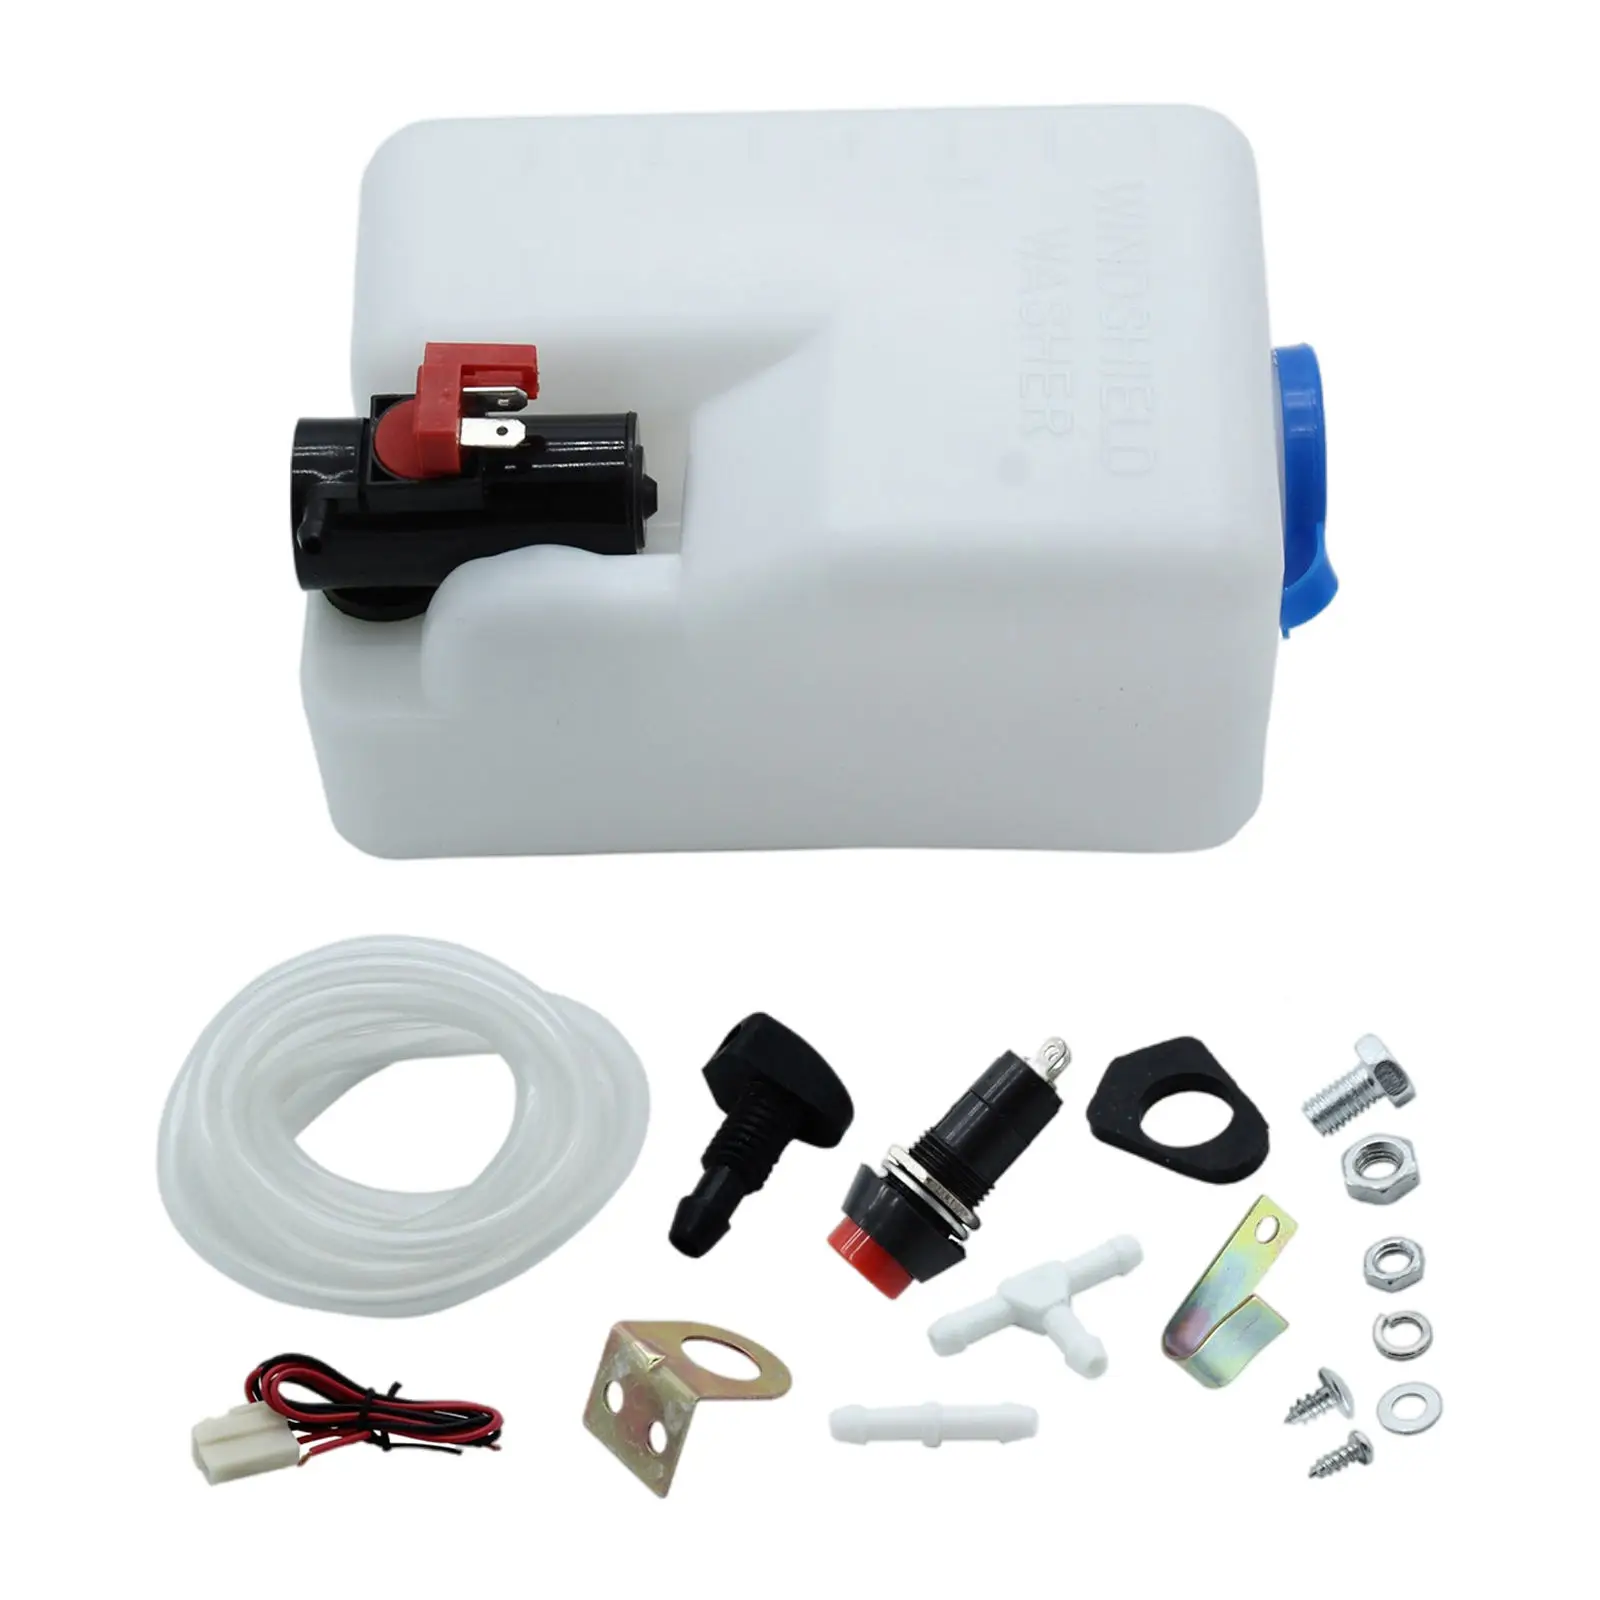 Windshield Washer Reservoir Sprayer Kit with Switch Clean Tank Fit for Car Truck